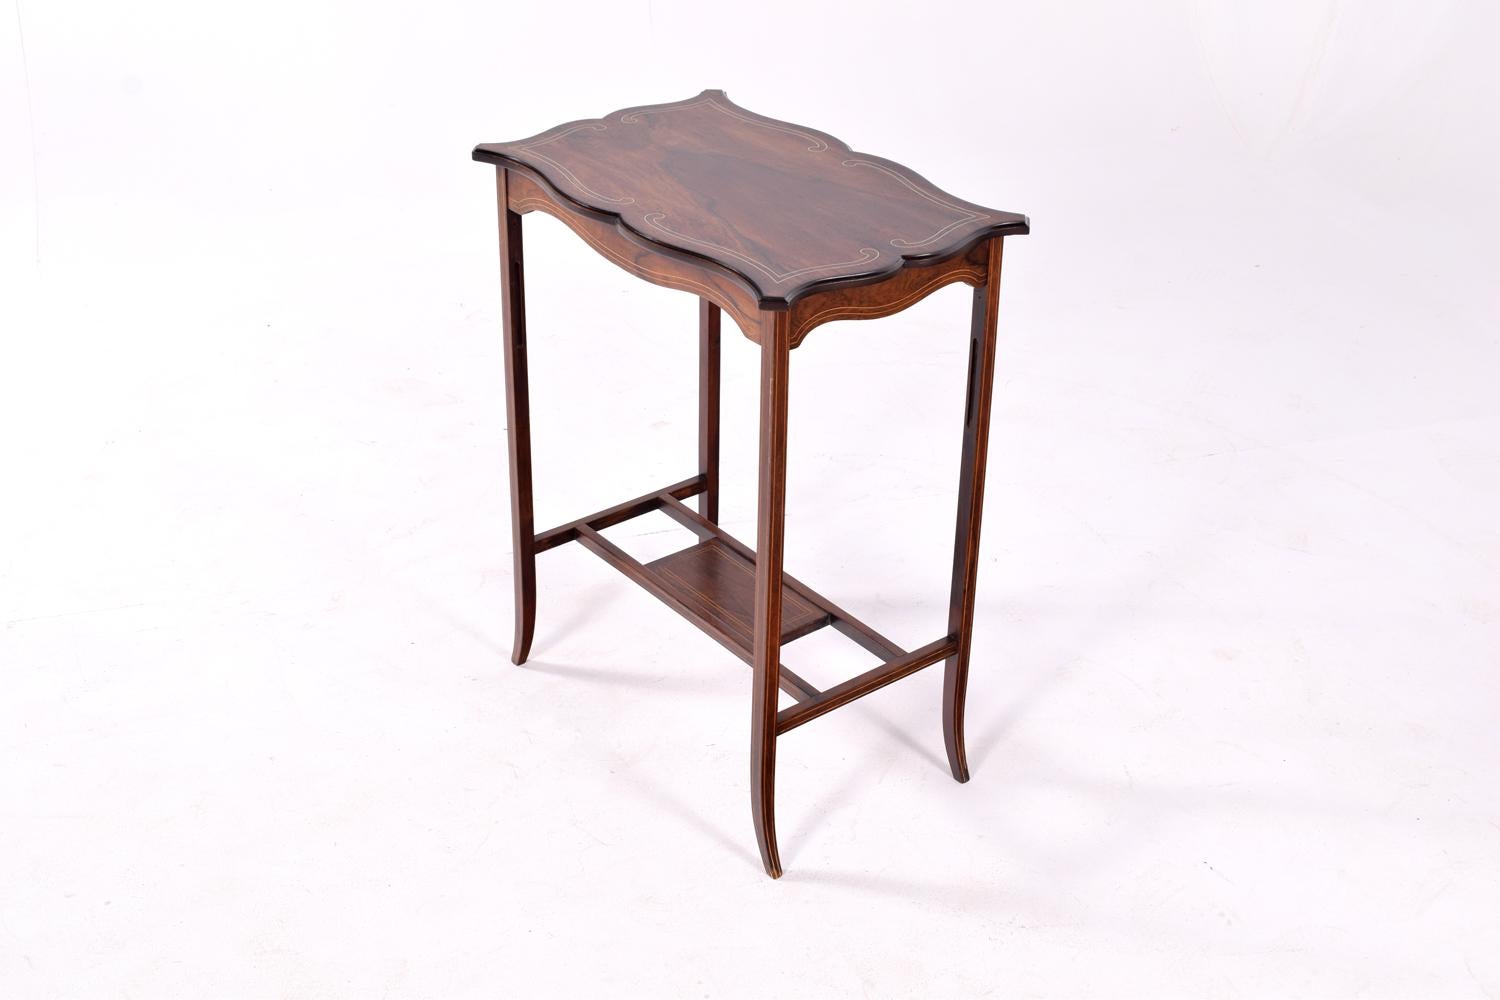 Antique side table, an English, Edwardian lamp table in rosewood. Elegant lines and the top bordered by a tramline boxwood string perimeter.